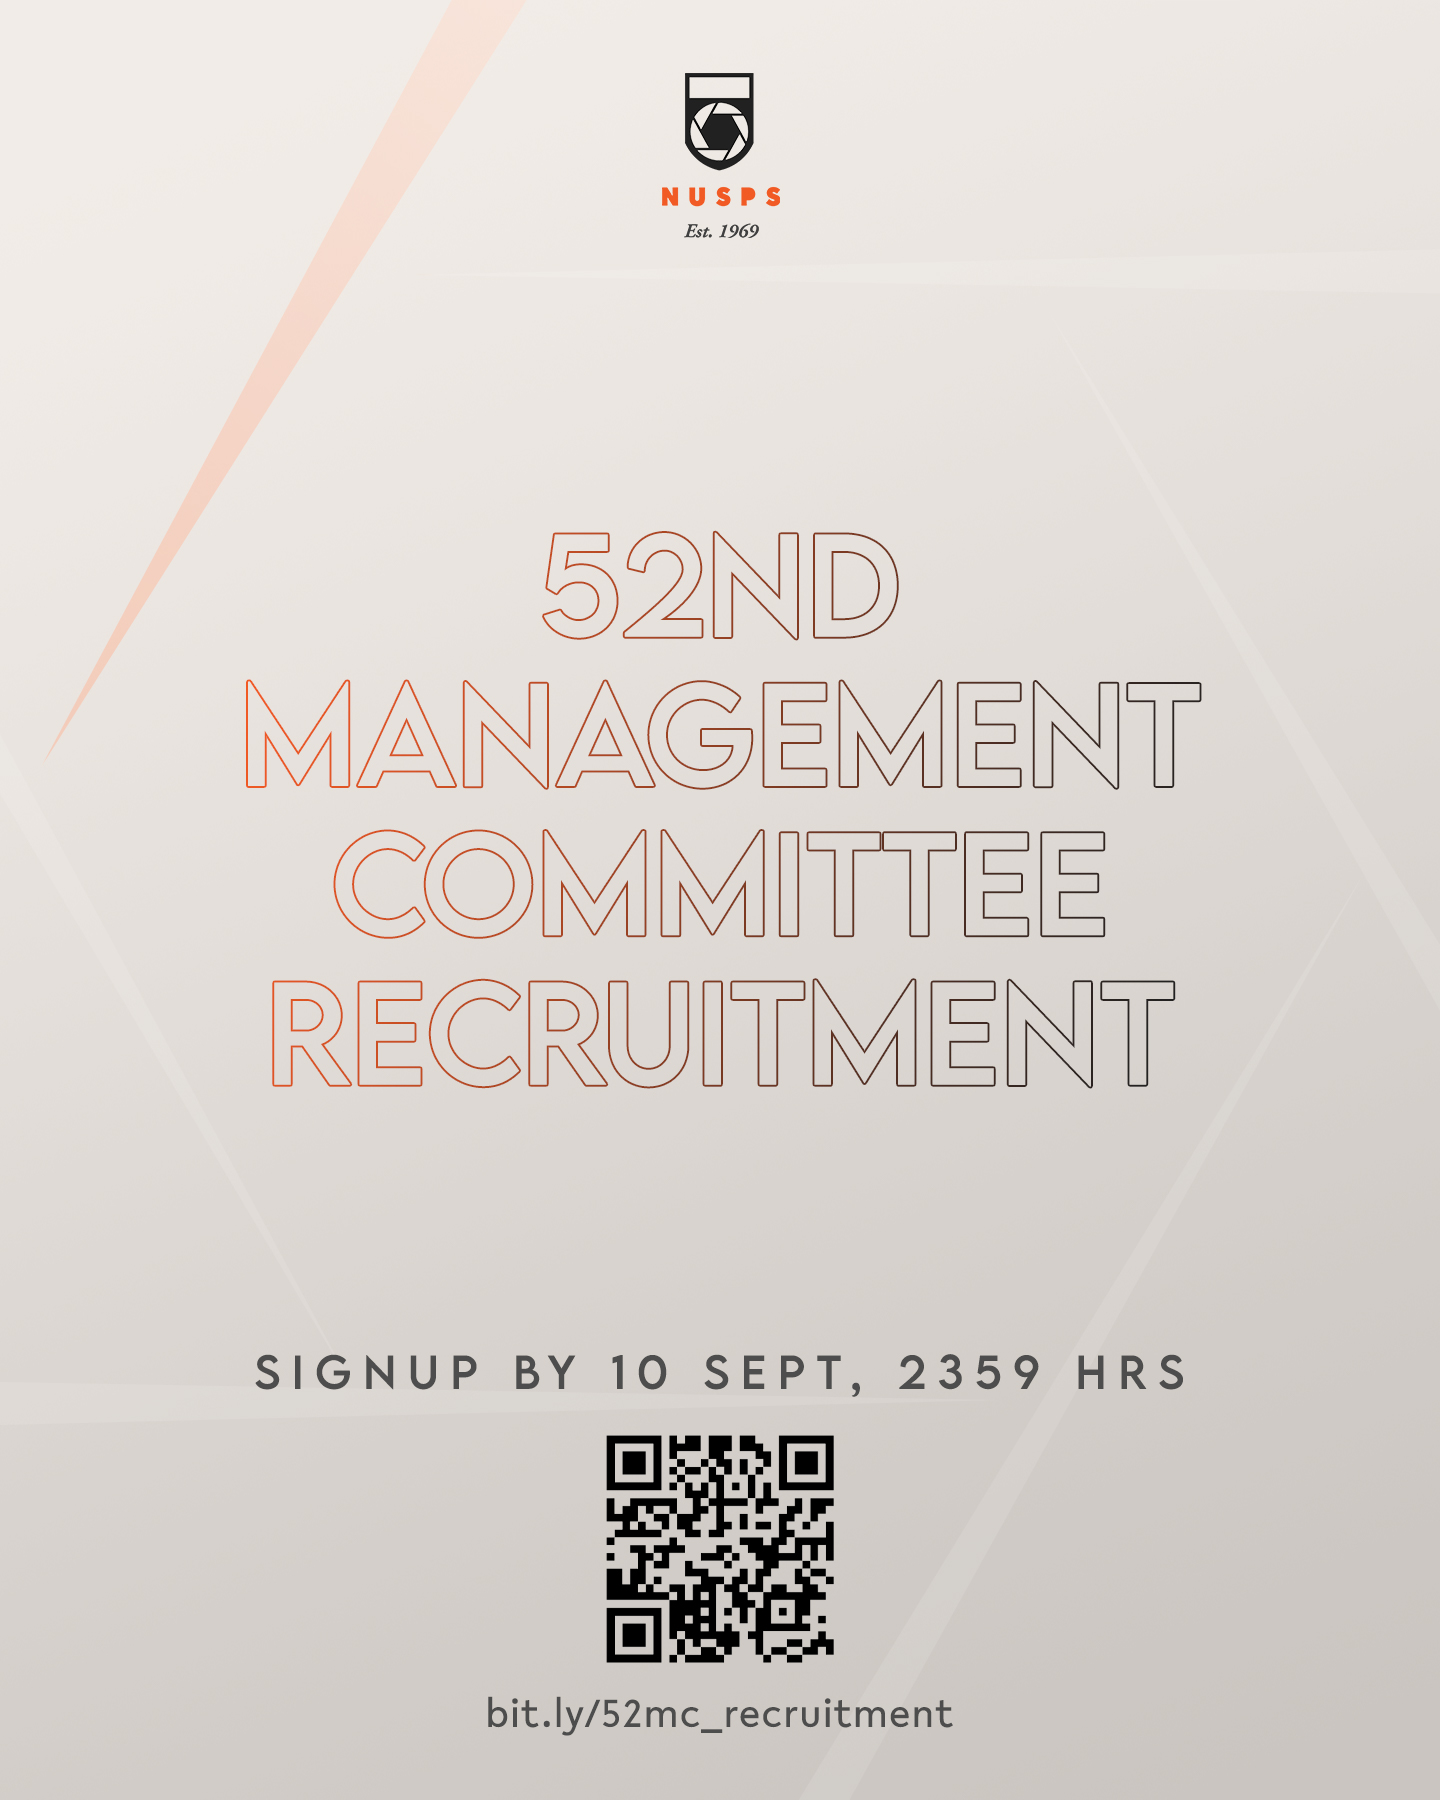 NUSPS 52nd Management Committee Recruitment